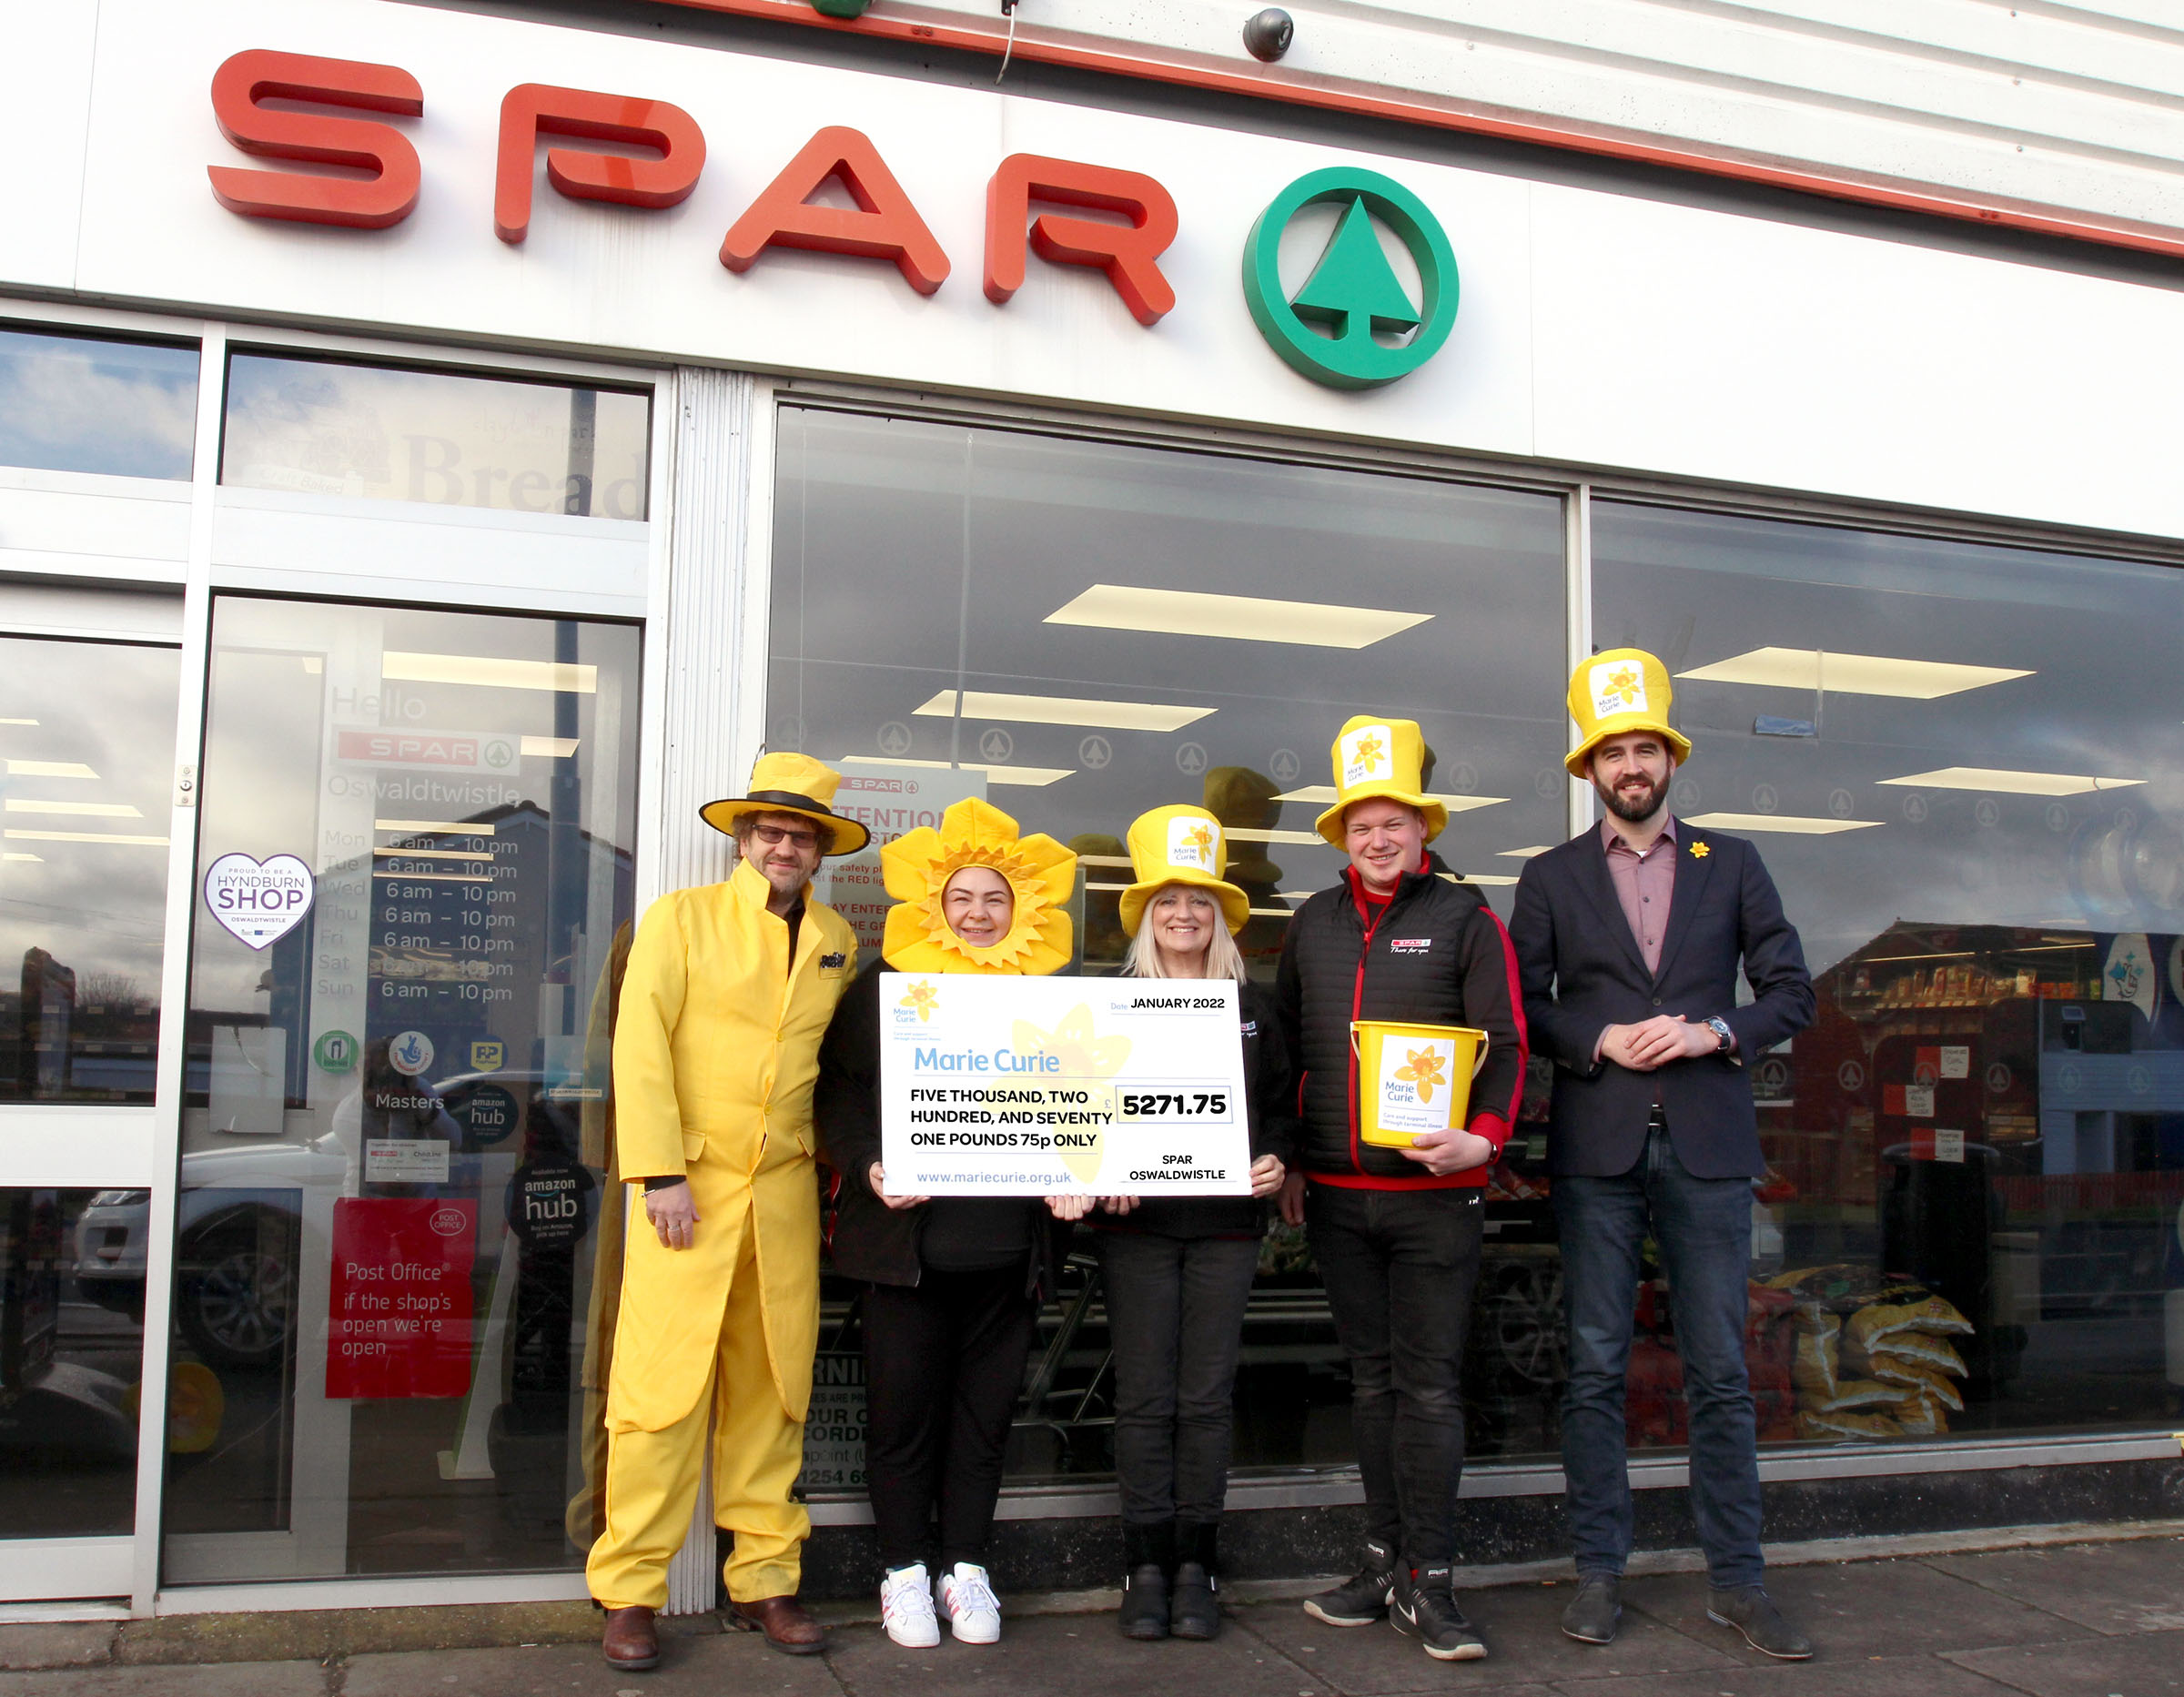 James Hall & Co. Ltd marks £500,000 milestone for Marie Curie as leading fundraising SPAR stores celebrate achievement